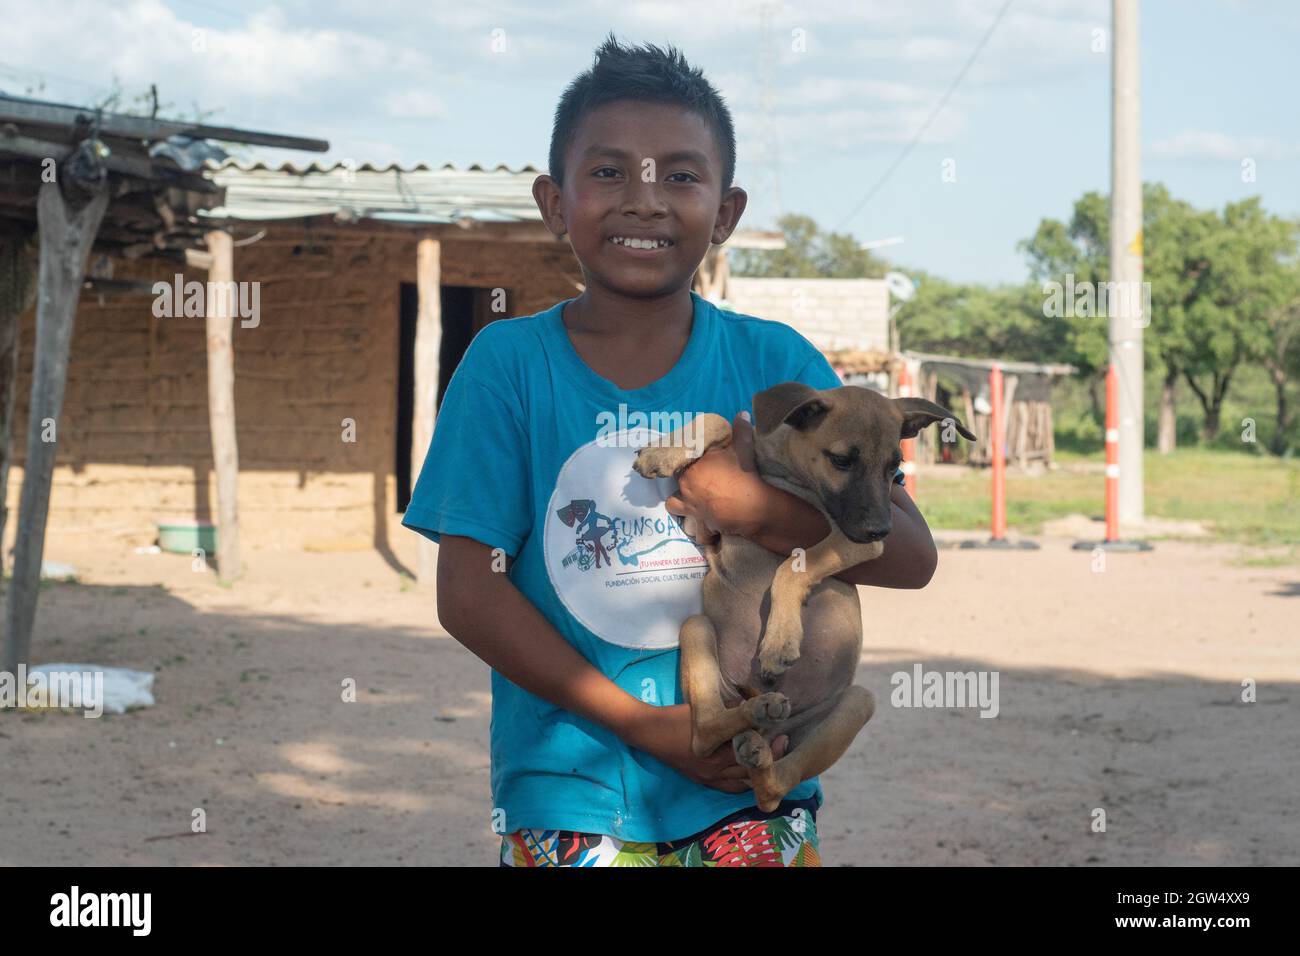 A Wayuu indigenous child poses for a photo with his dog during a Humanitarian Mission developed by 'De Corazon Guajira' in Mayapo at La Guajira - Colombia were they visited the Wayuu indigenous communities 'Pactalia, Poromana, Perrohuila' on September 26, 2021. The Guajira region in Colombia is the poorest region in Colombia, with its people commongly living without drinkable water, electricity and food. Stock Photo